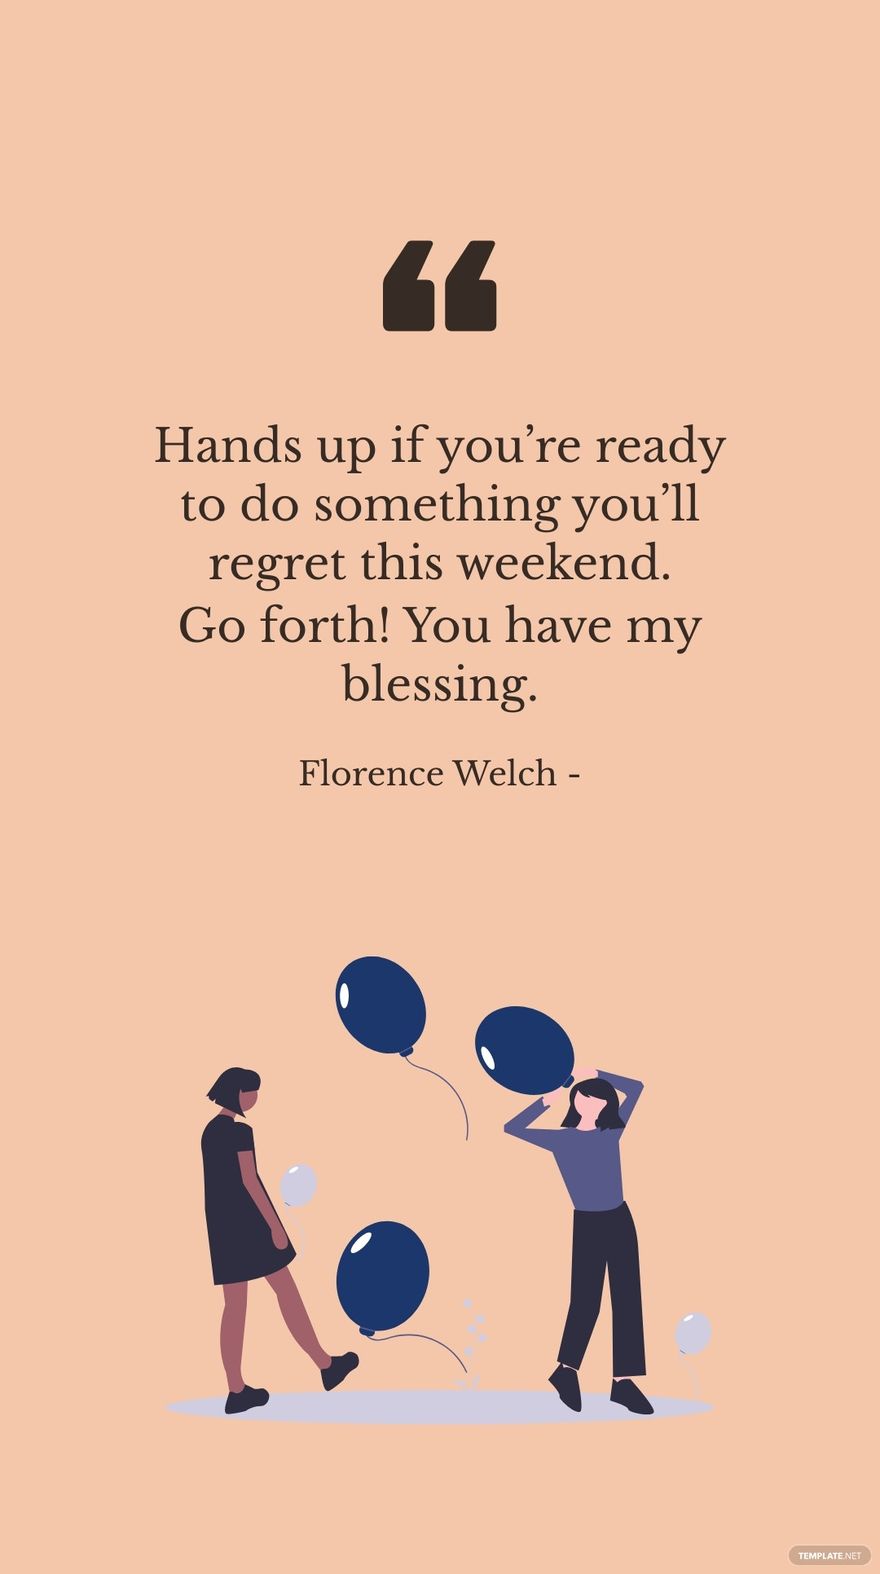 Florence Welch - Hands up if you’re ready to do something you’ll regret this weekend. Go forth! You have my blessing.